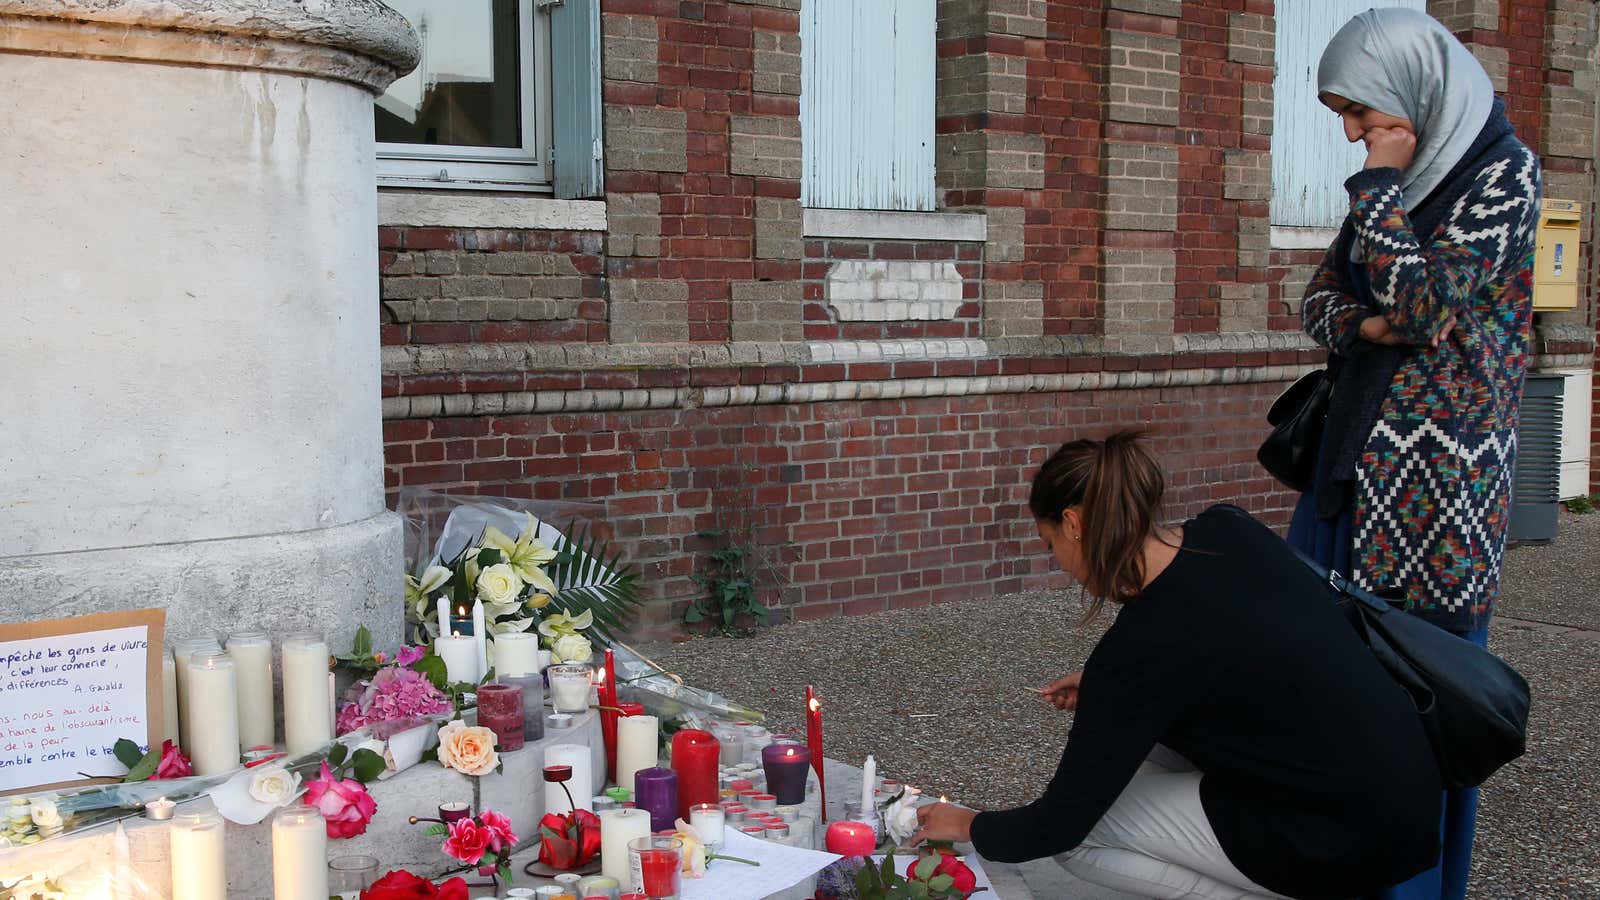 Women pay their respects to Father Jacques Hamel in Rouen, France.